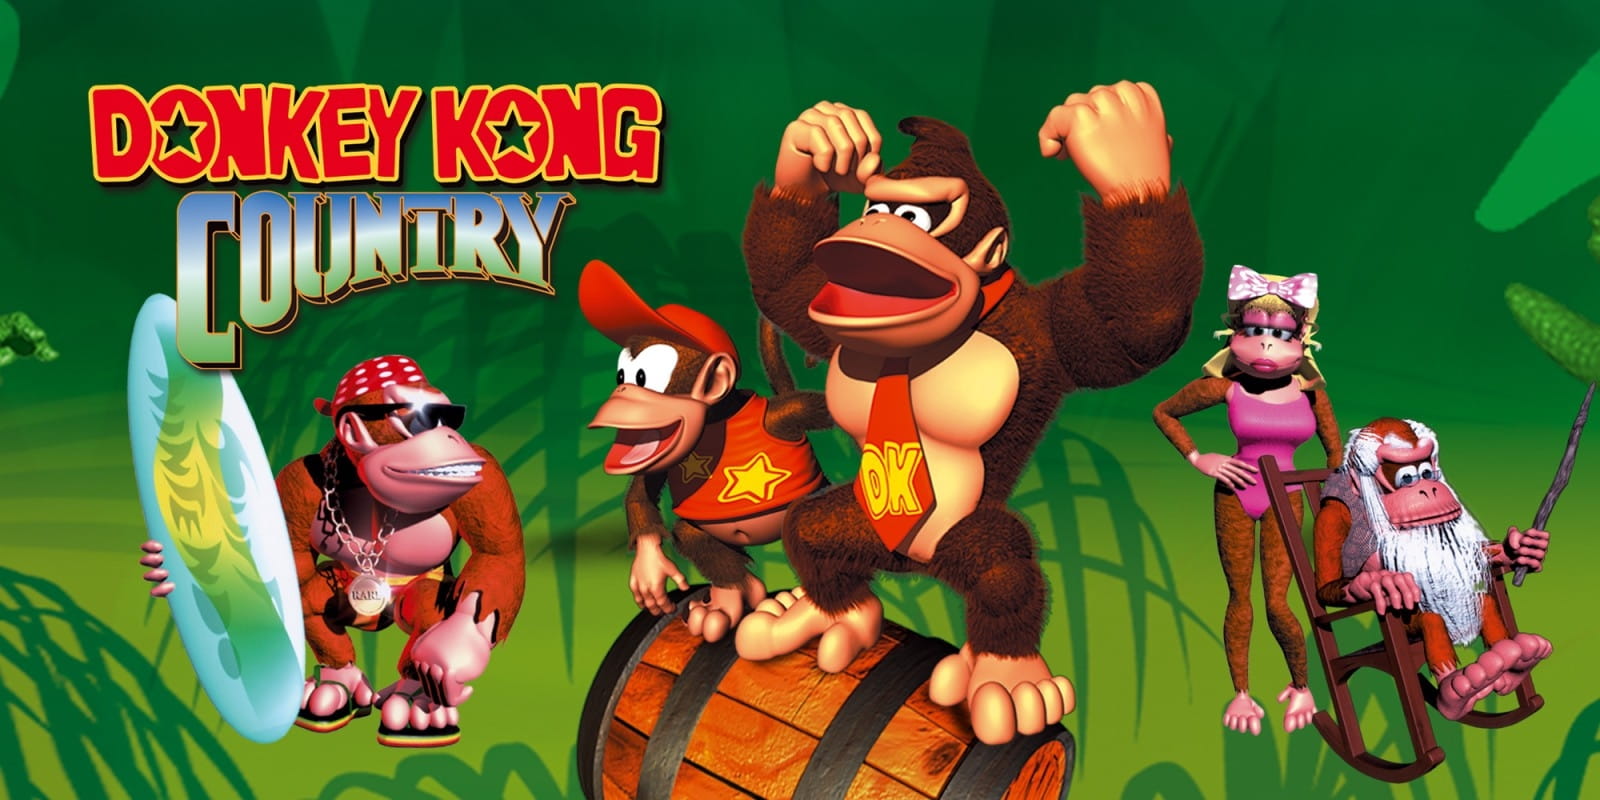 Gameplay: Donkey Kong Country